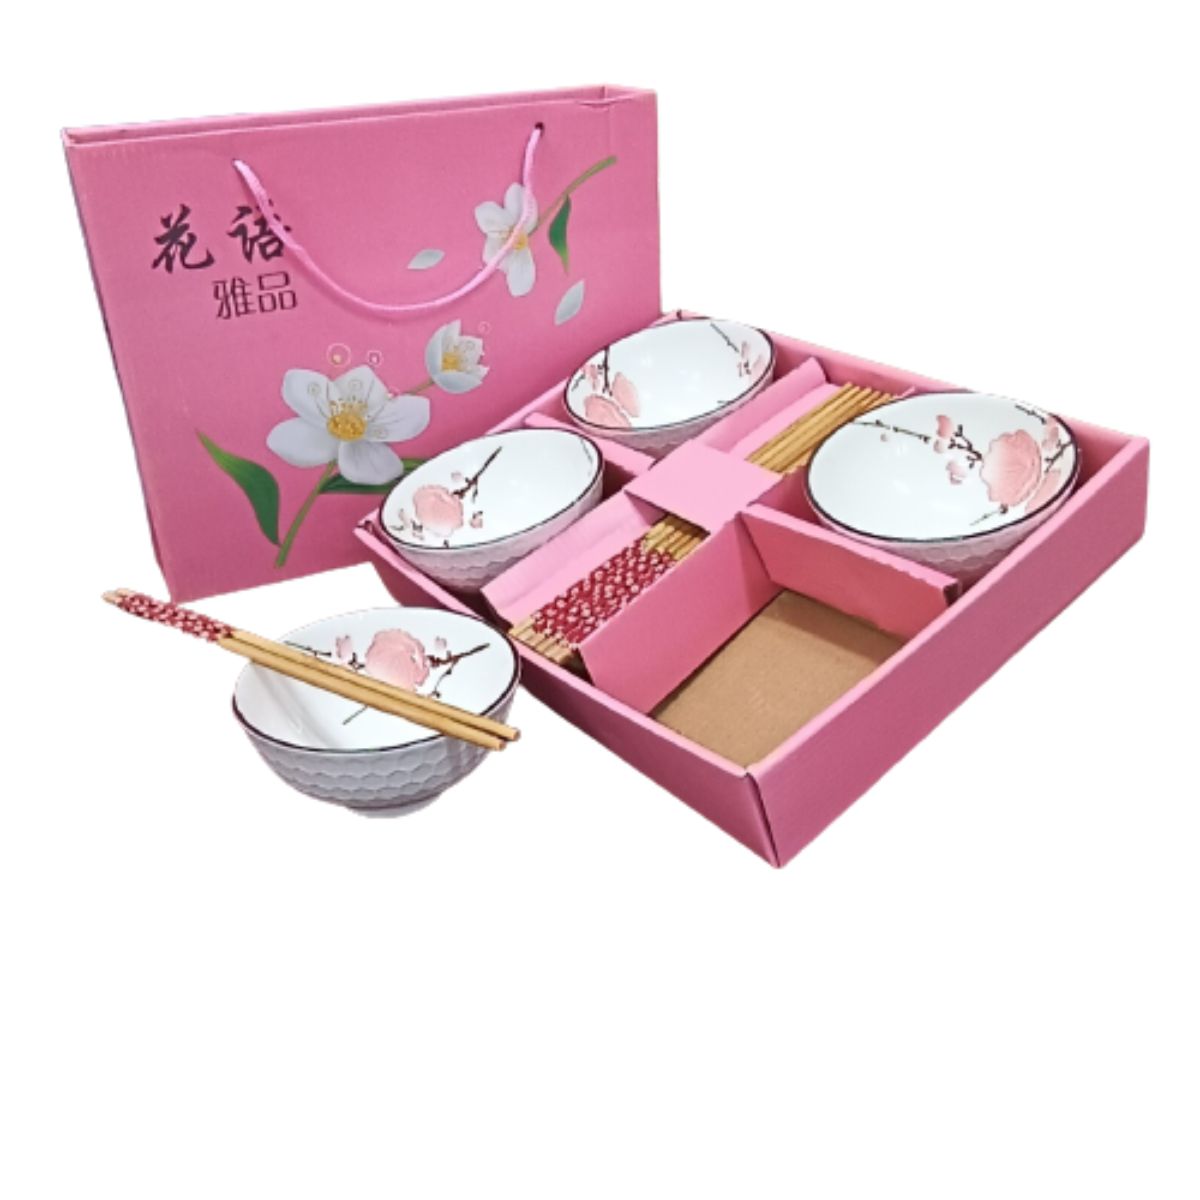 Tableware Set Gift Box with Rice Bowls And Chopsticks - 4Pcs - Pink